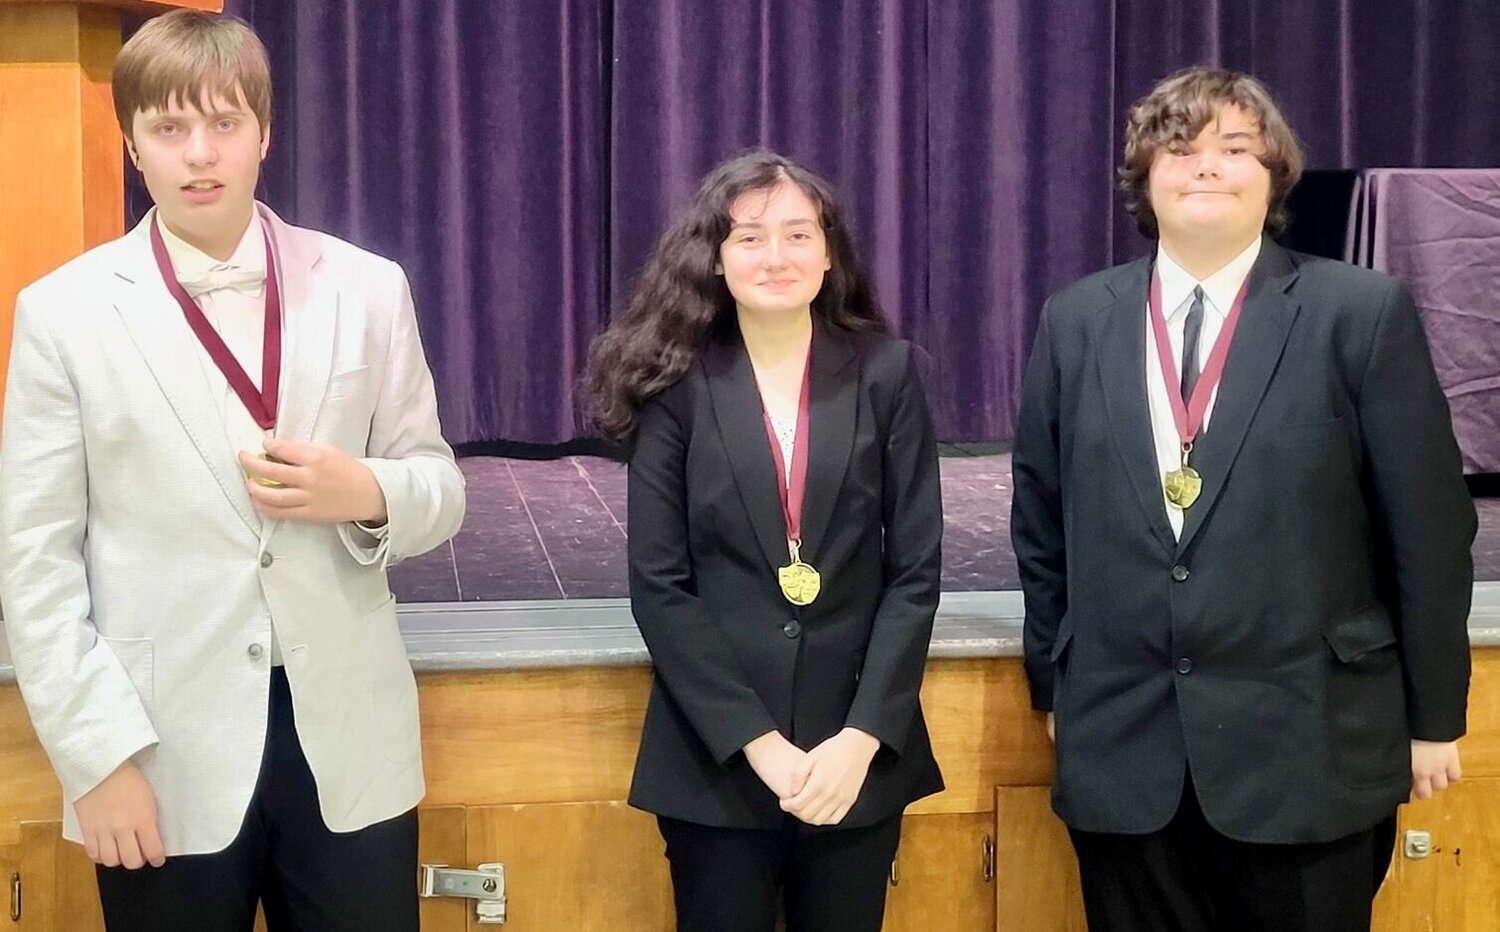 Willow Springs High School students Caleb Martin, left, Macy Pearson, center, and Braiden Dewitt recently competed at the Mtn. Grove High School Speech and Debate Tournament. Martin earned sixth place in Humorous Interpretation, while Pearson and Dewitt made fourth place in Duo Interpretation.